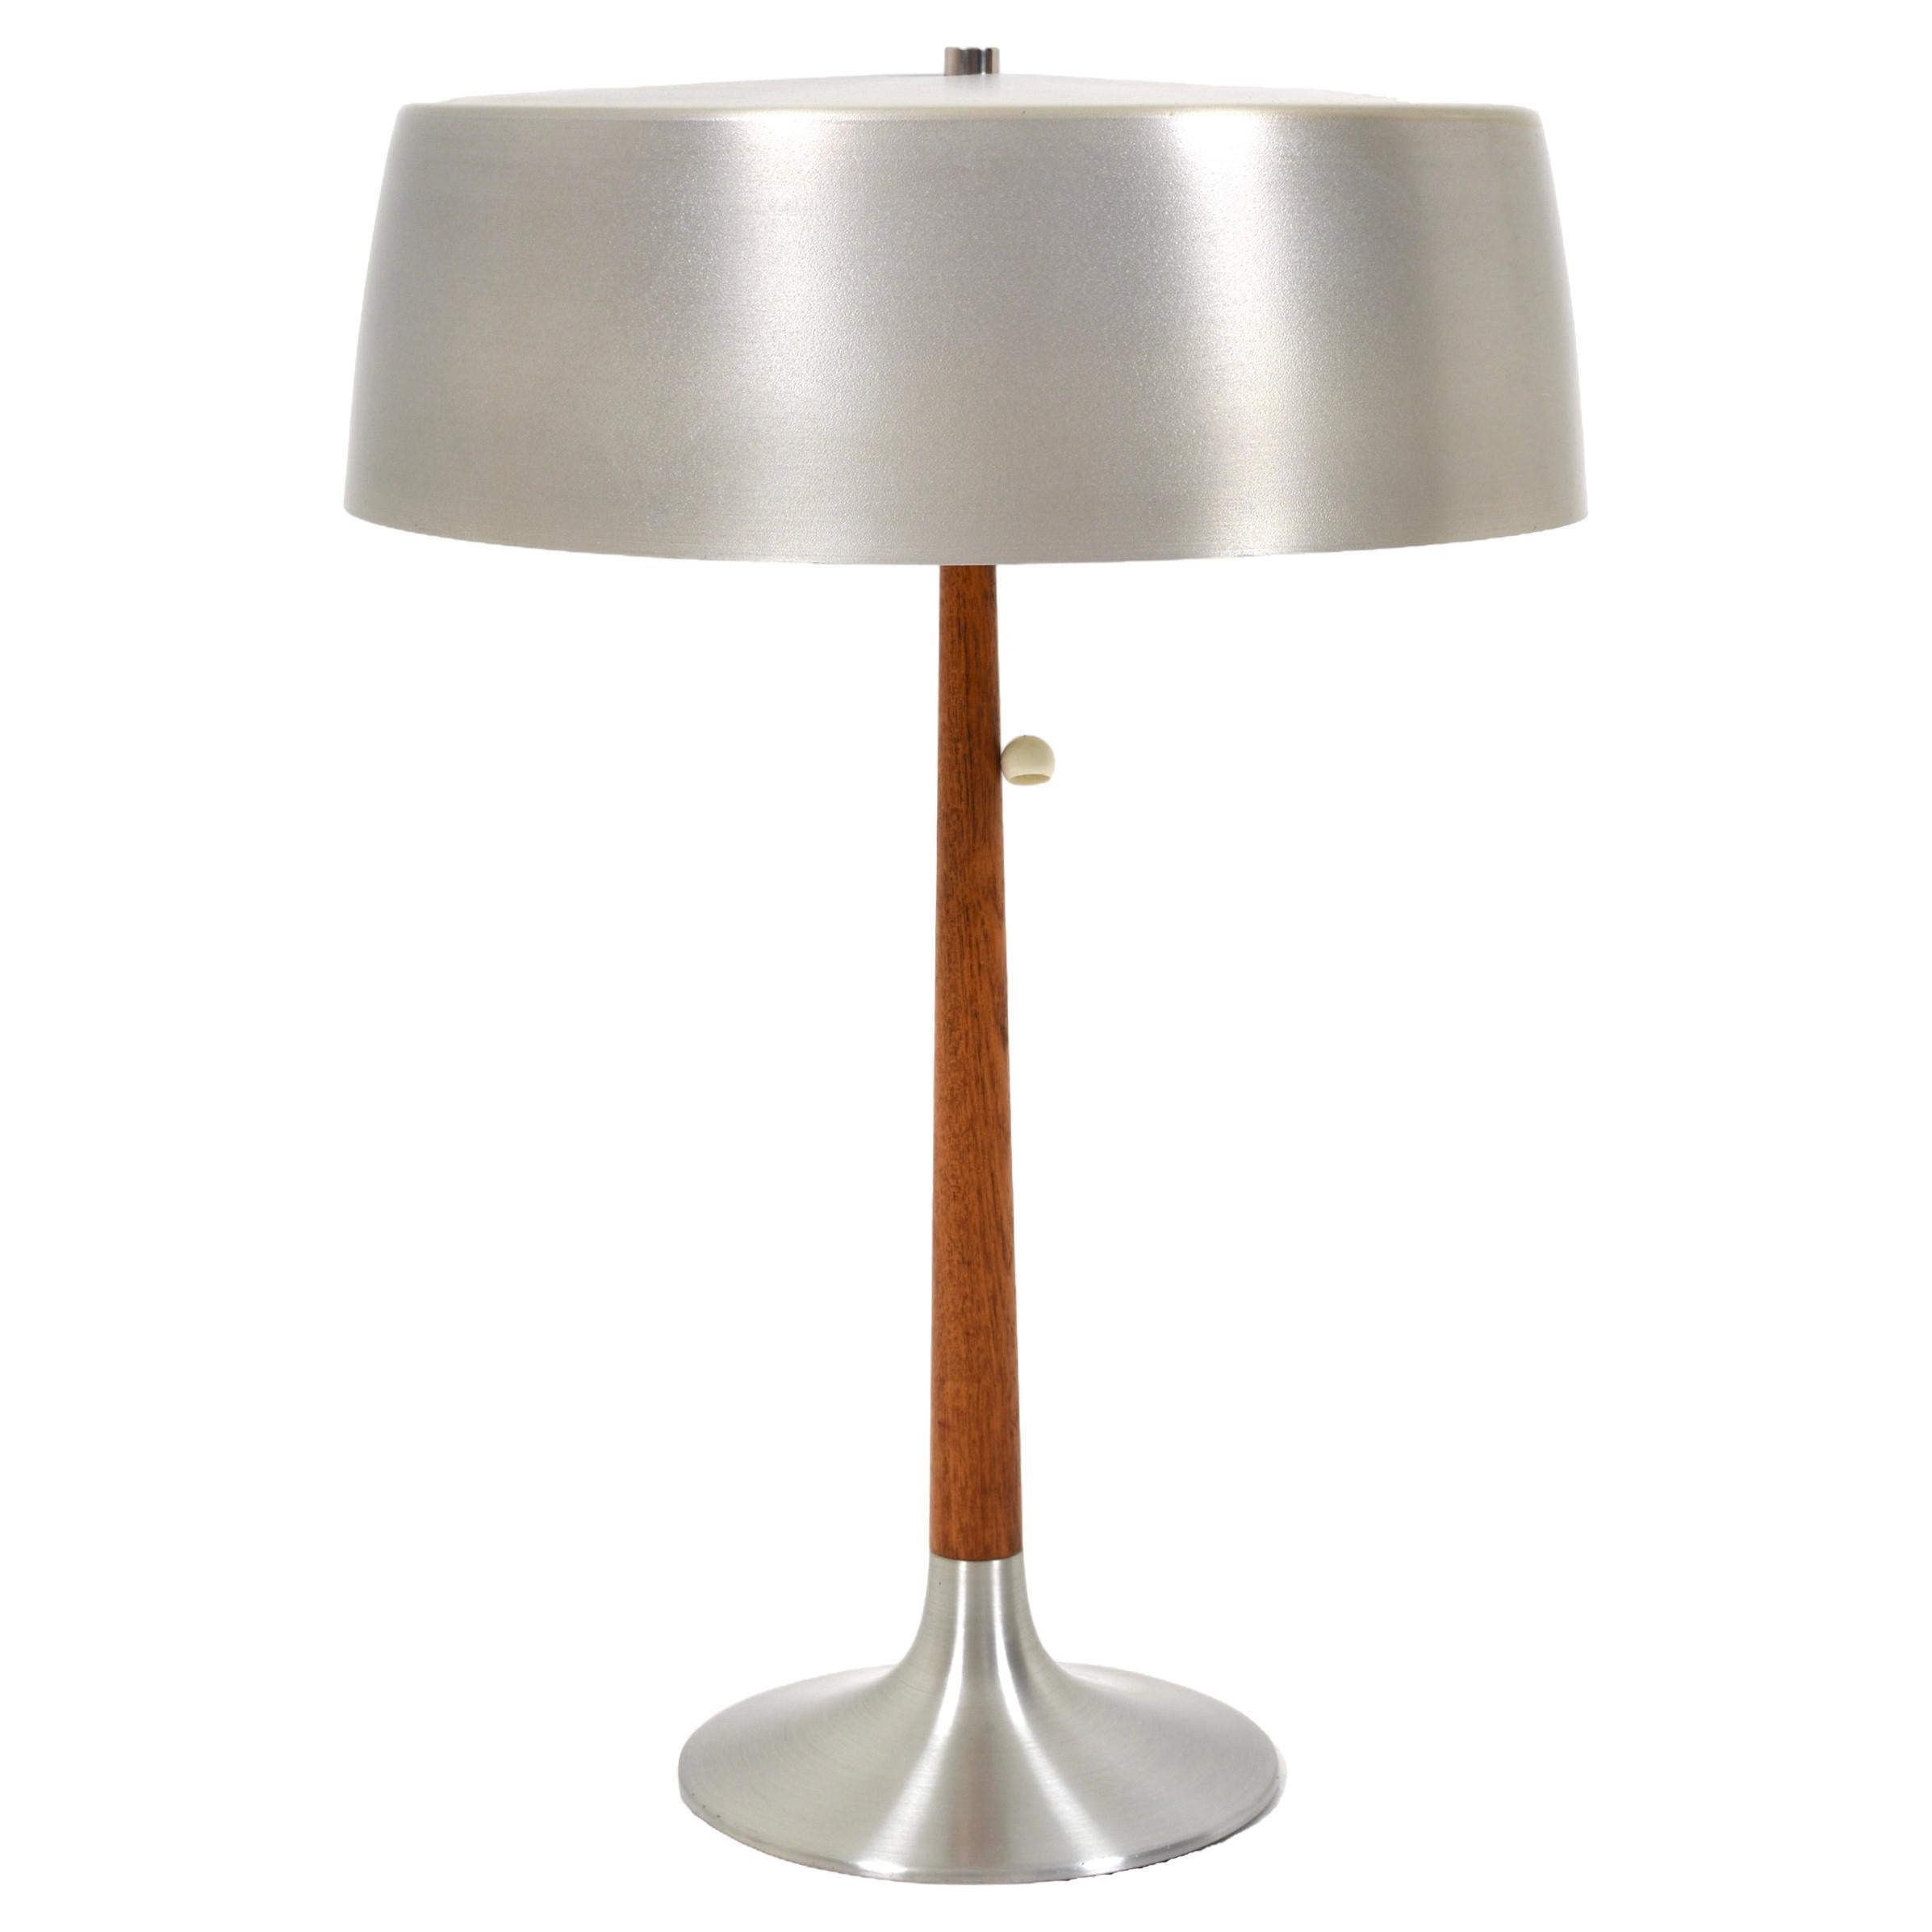 Scandinavian Mid Century Table Lamp by Svend Aage Holm Sørensen for ASEA For Sale